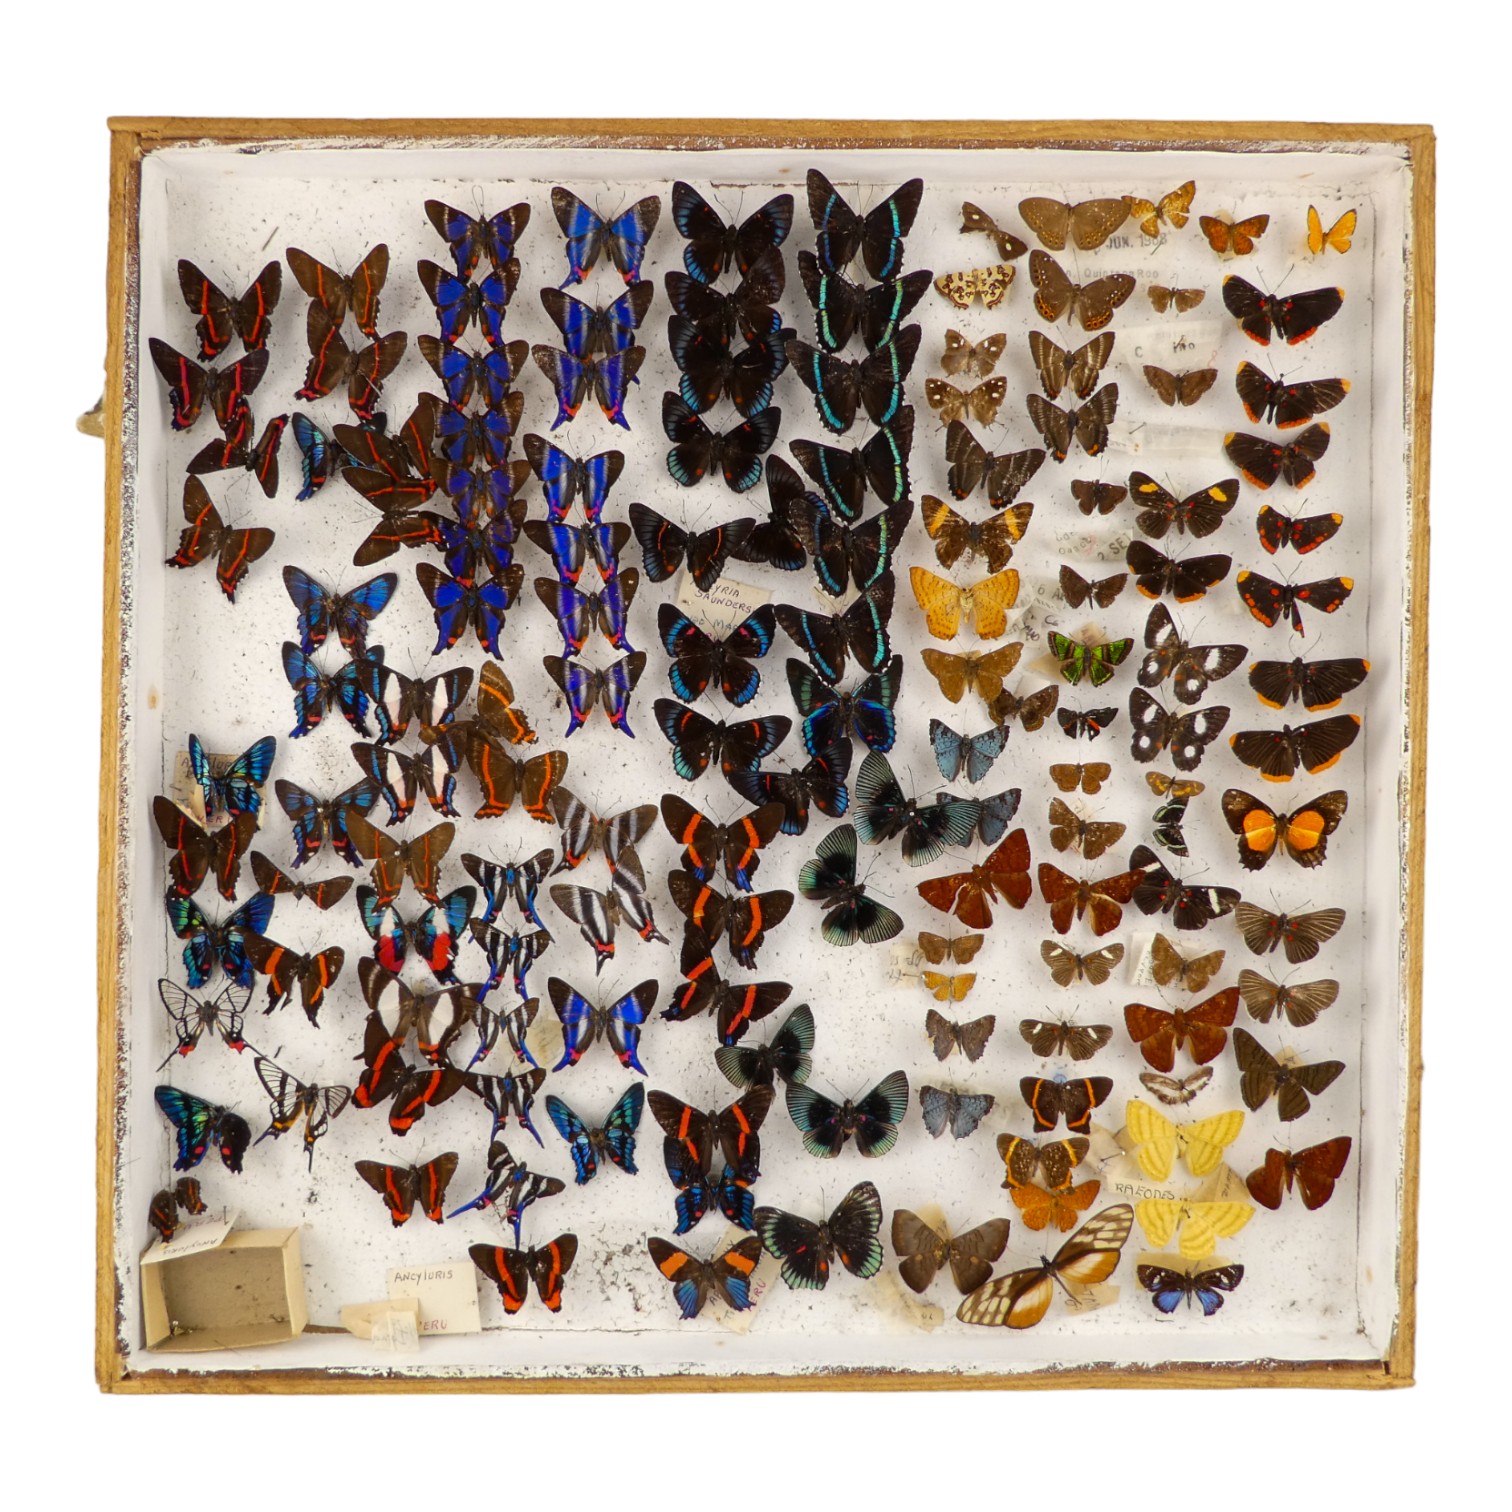 A case of butterflies in ten rows - including Variable Beautymark, Rhetus Arcius and Soldier